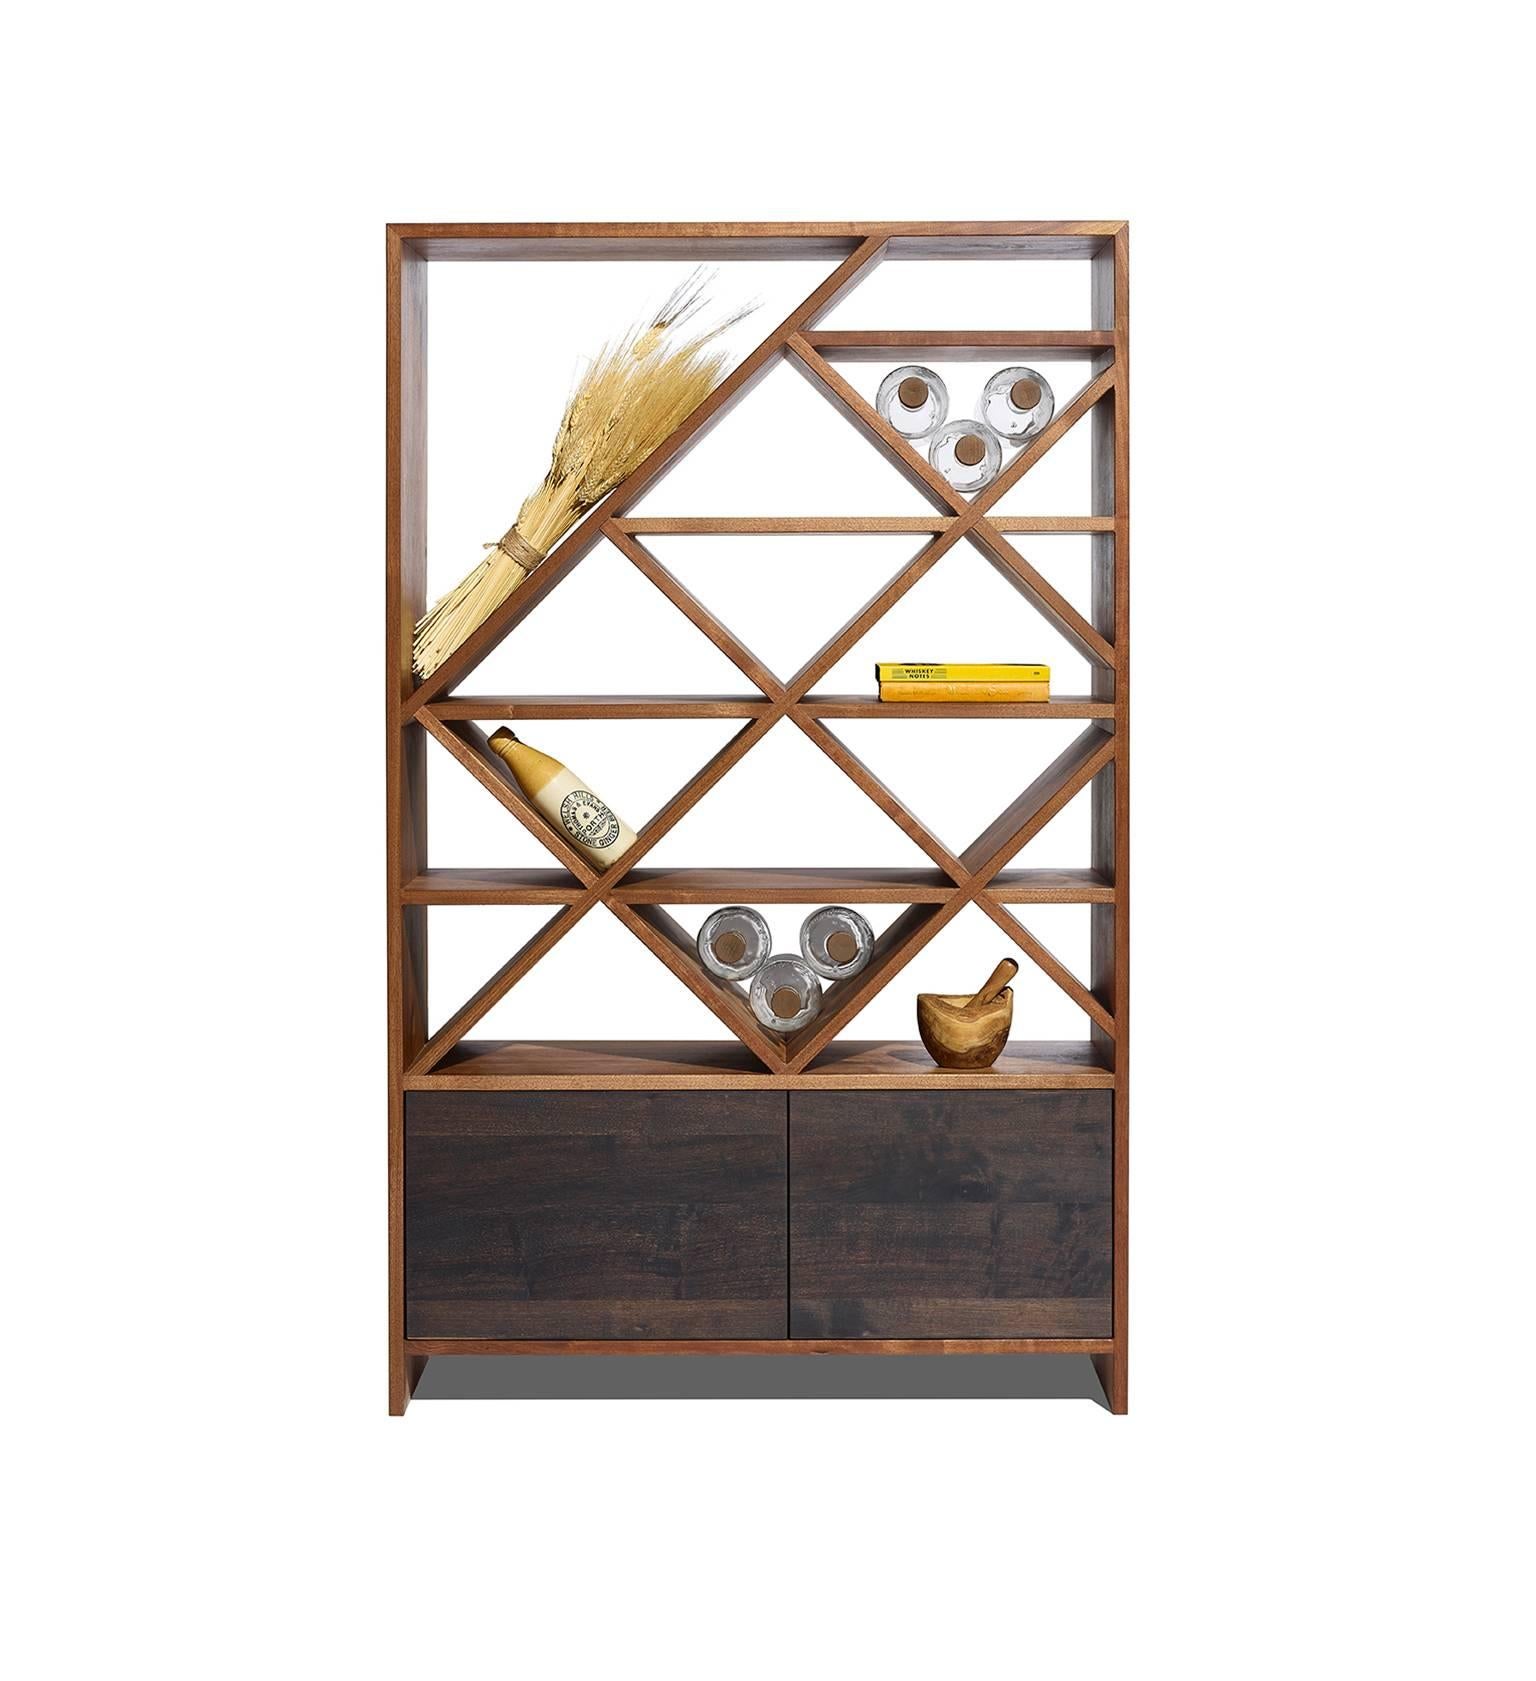 Handsome, enigmatic and masterfully crafted The Hive Bar display cabinet is made in natural and blackened American walnut. Open shelving above for bottle and display storage and closed compartments below for stock storage. Finished and functional on